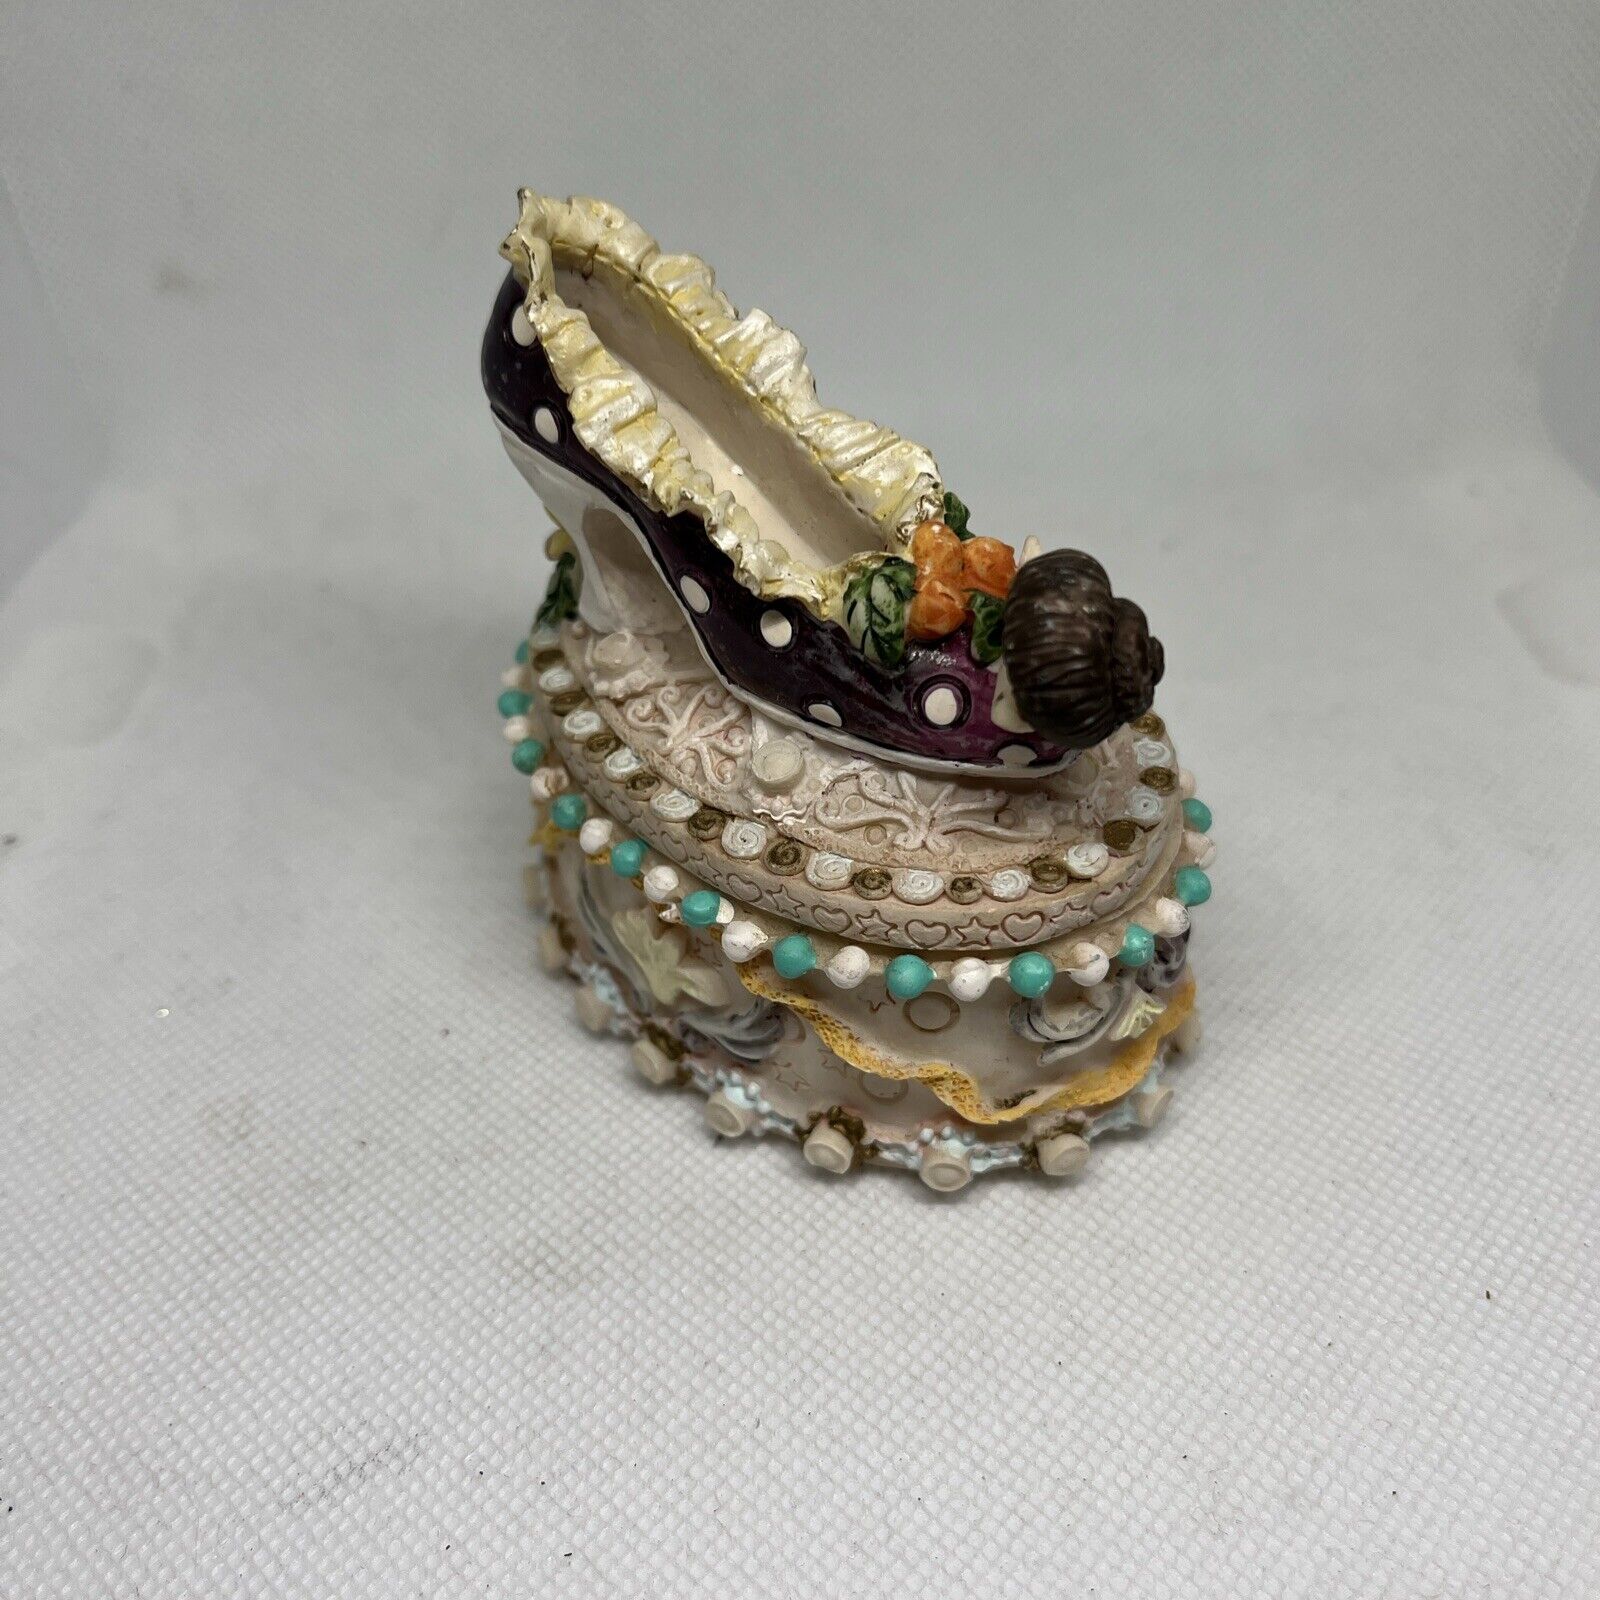 Hand Painted Jewelry/ Trinket Box With Lid Victorian Style Shoe Design